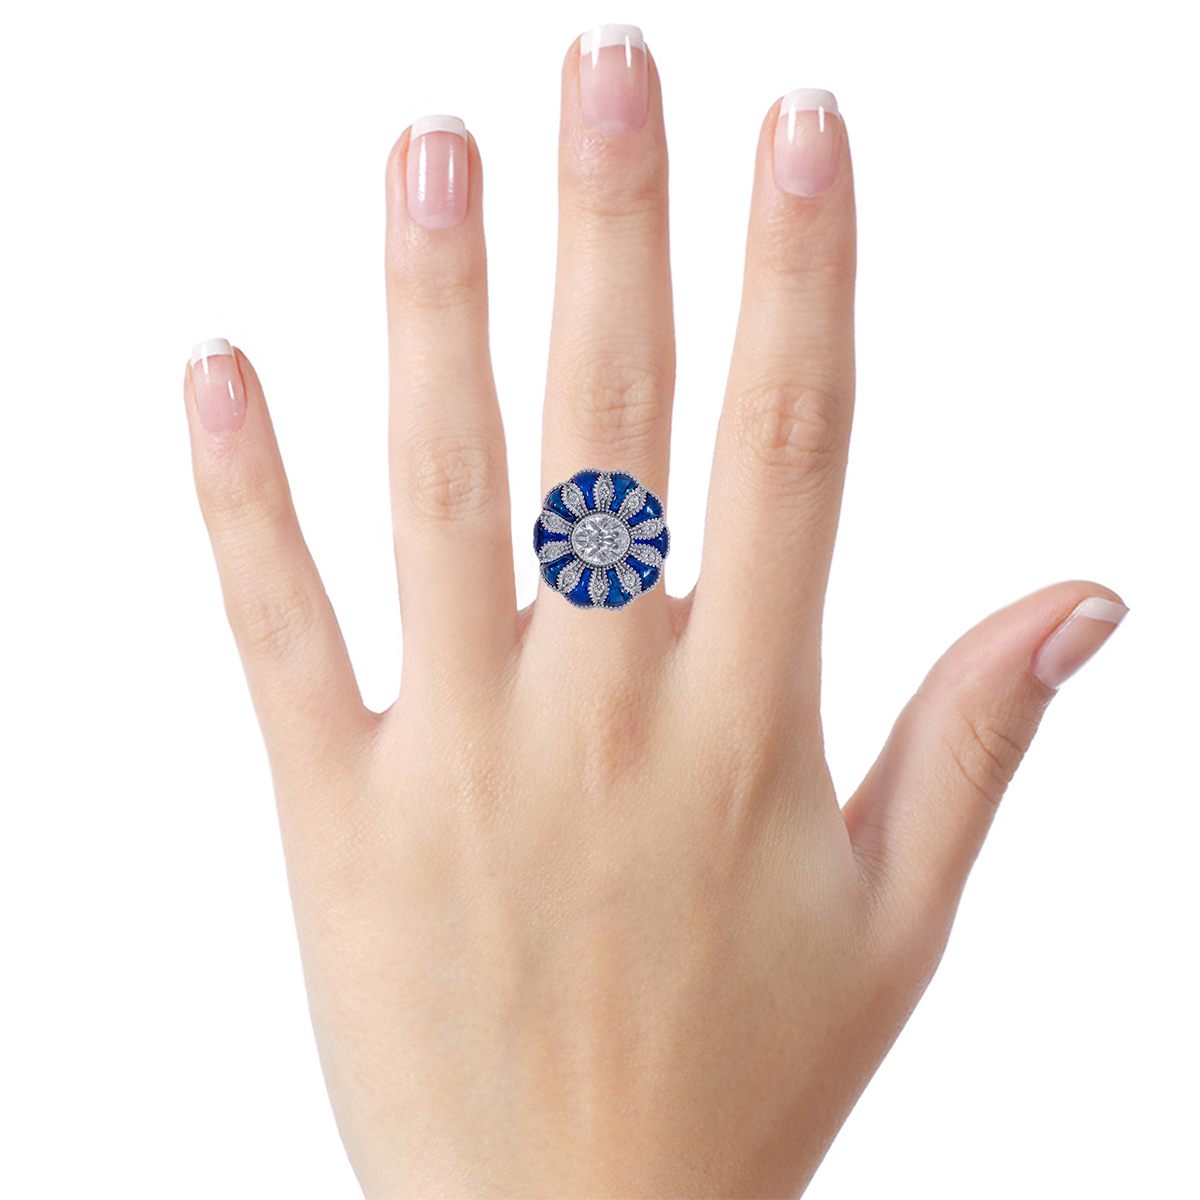 Bezel Set Cabochon Sapphire Ring at Reliable Gold in Providence, RI  Reliable Gold Ltd.